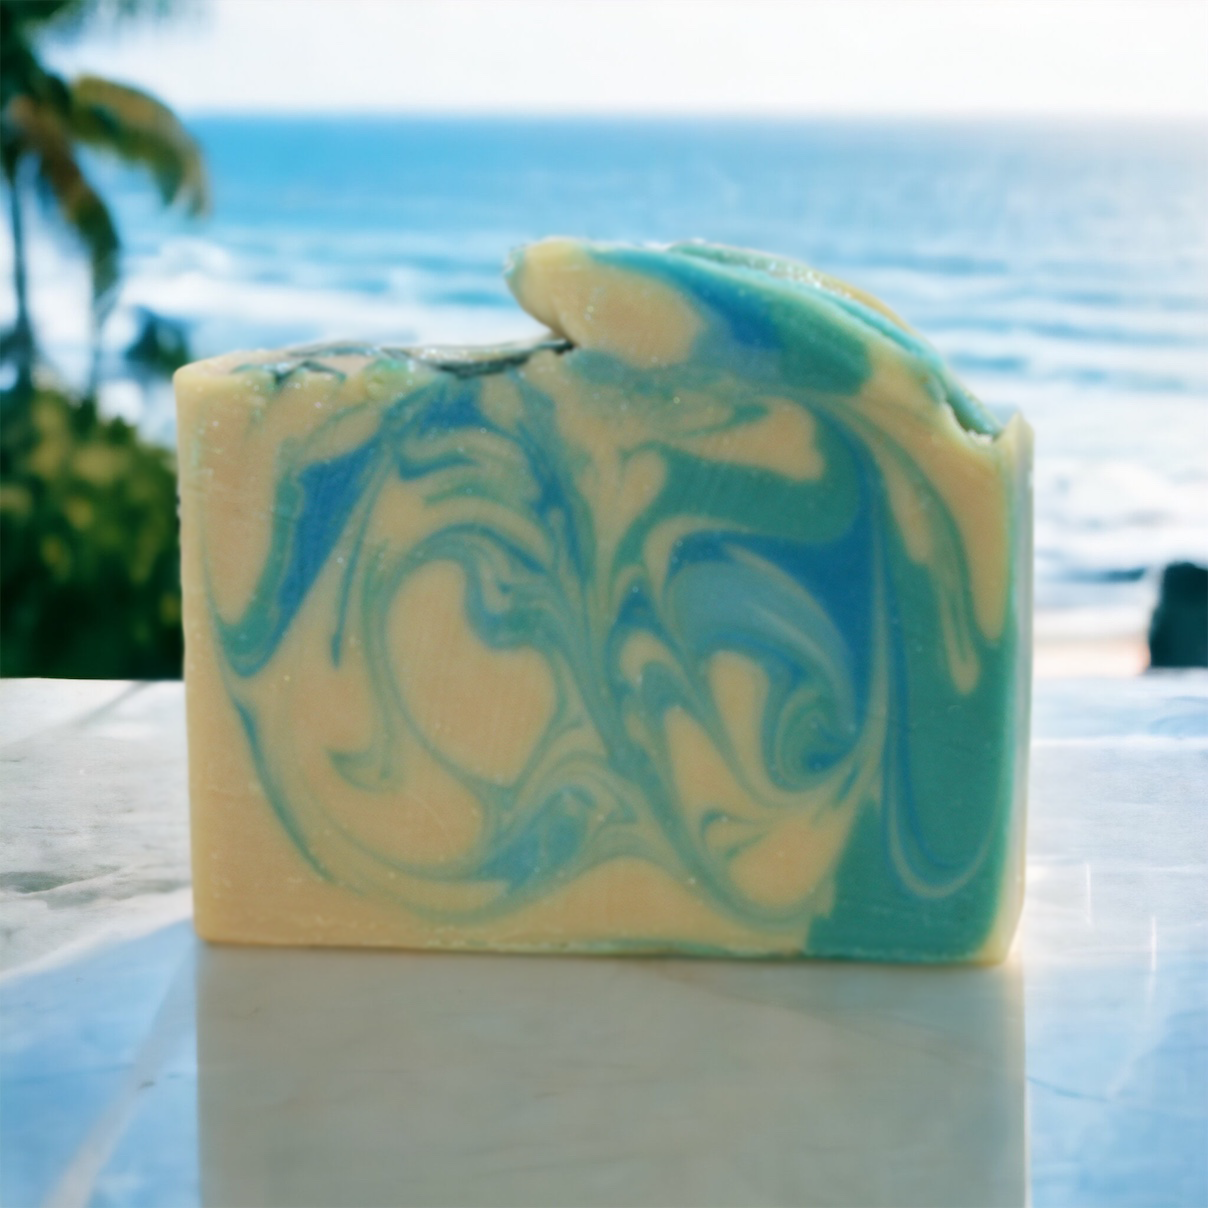 Baja Bloom Bar Soap on a white marble sill with a tropical beach in the background Alpaca Soaps AlpacaSoaps